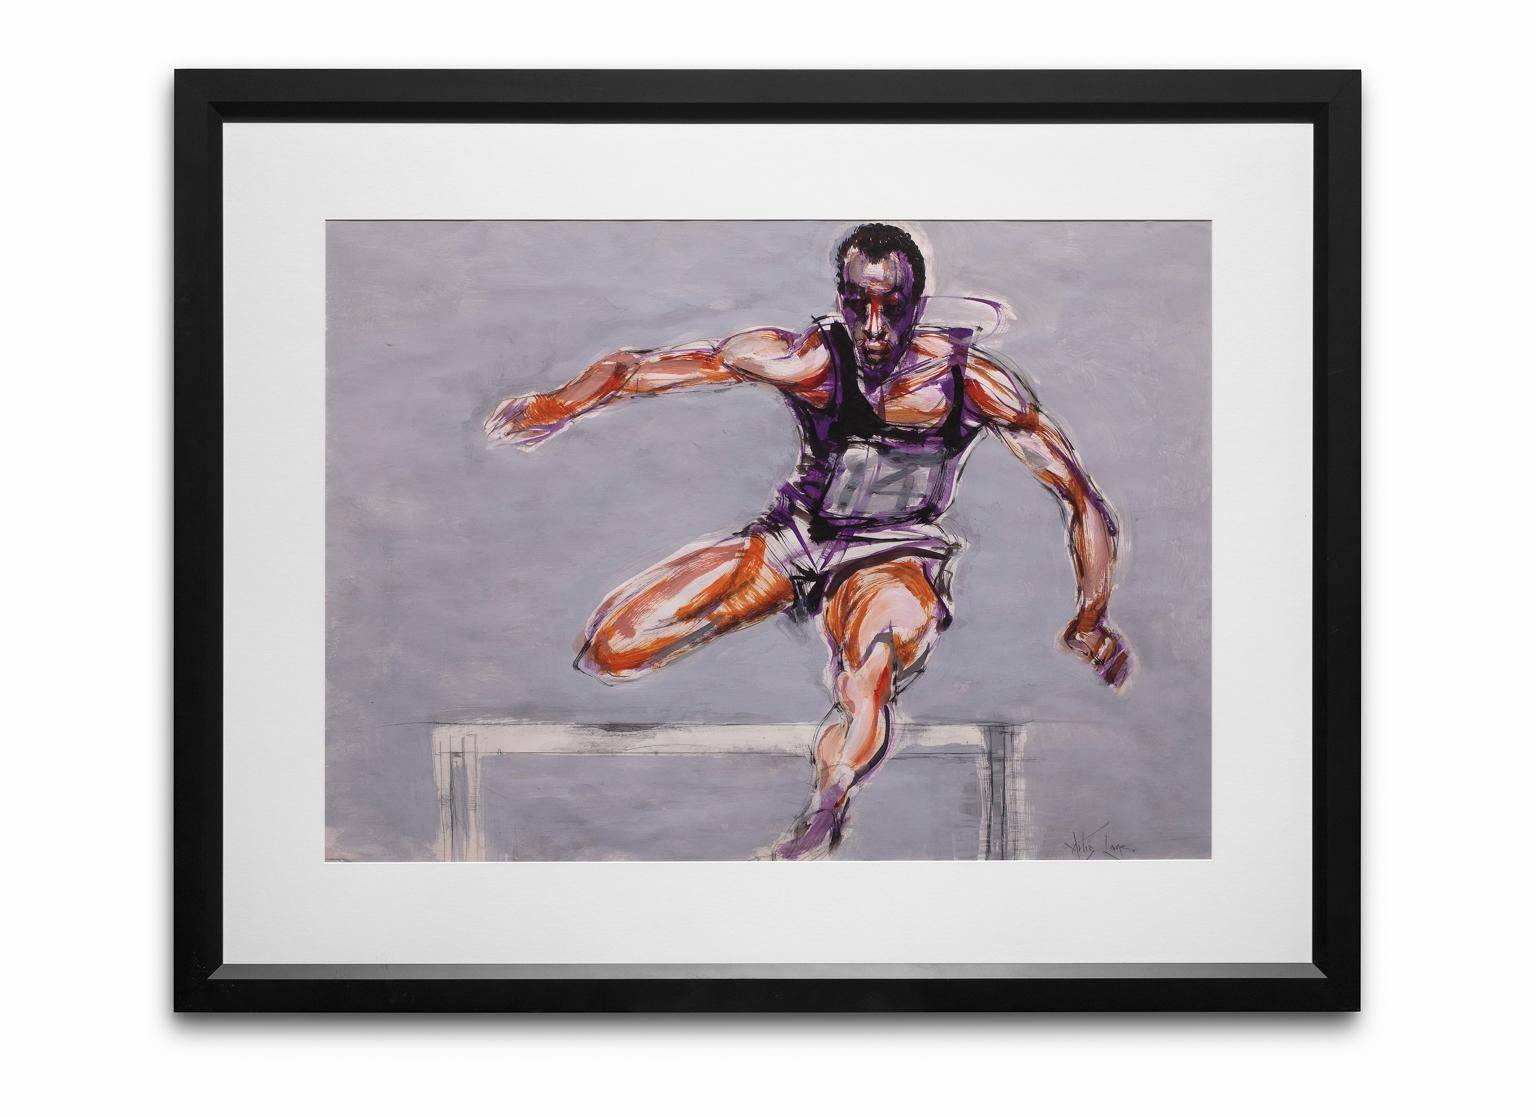 "Jesse Owens - Long Jump Medalist", Mixed Media on Paper - Mixed Media Art by Artis Lane